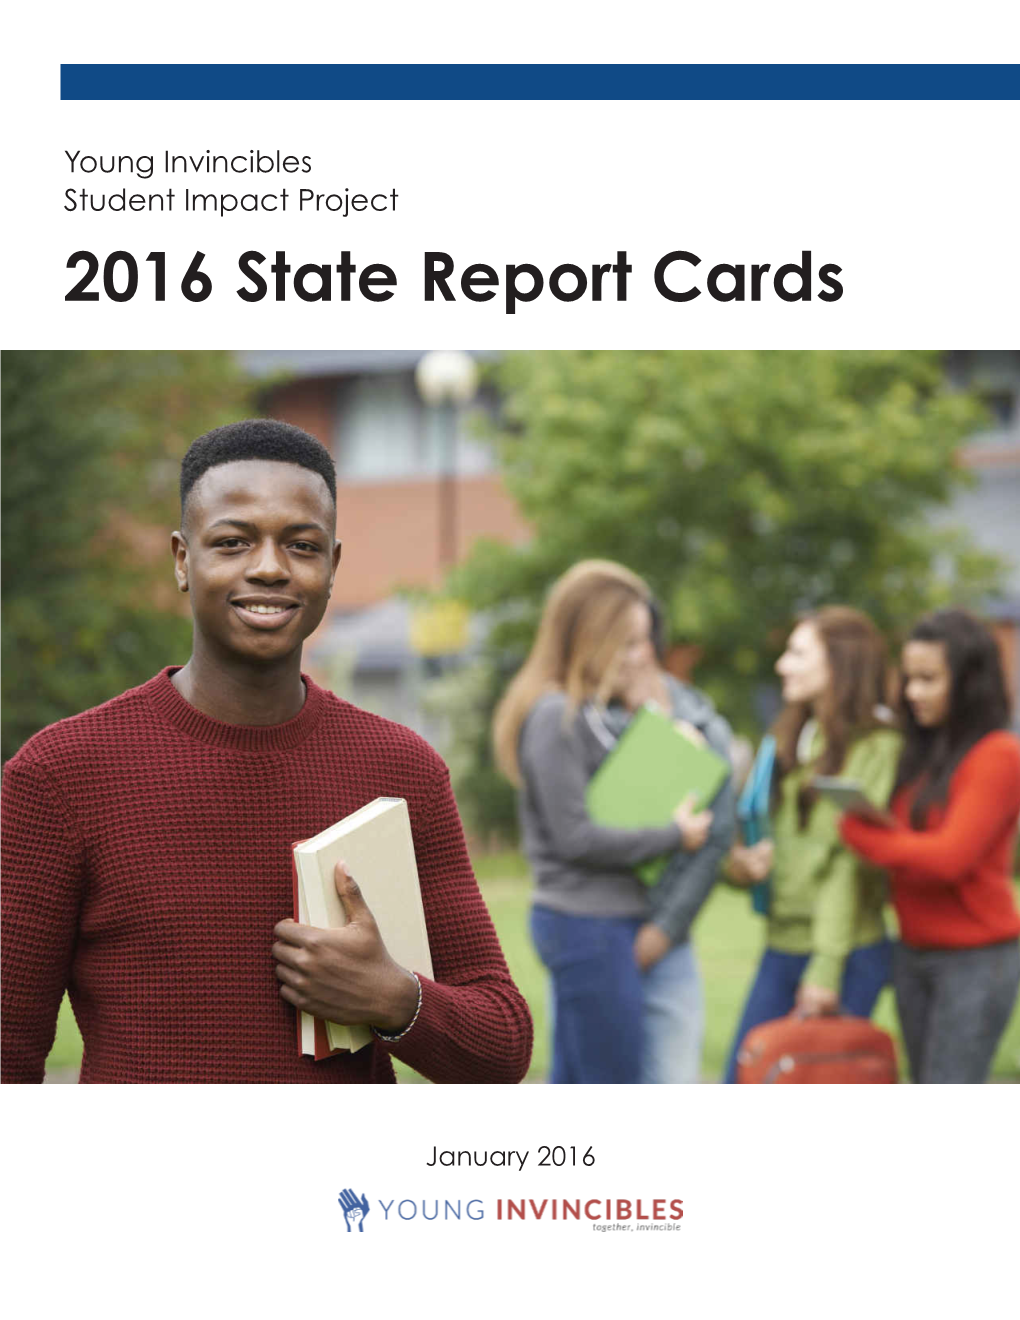 Young Invincibles Student Impact Project 2016 State Report Cards